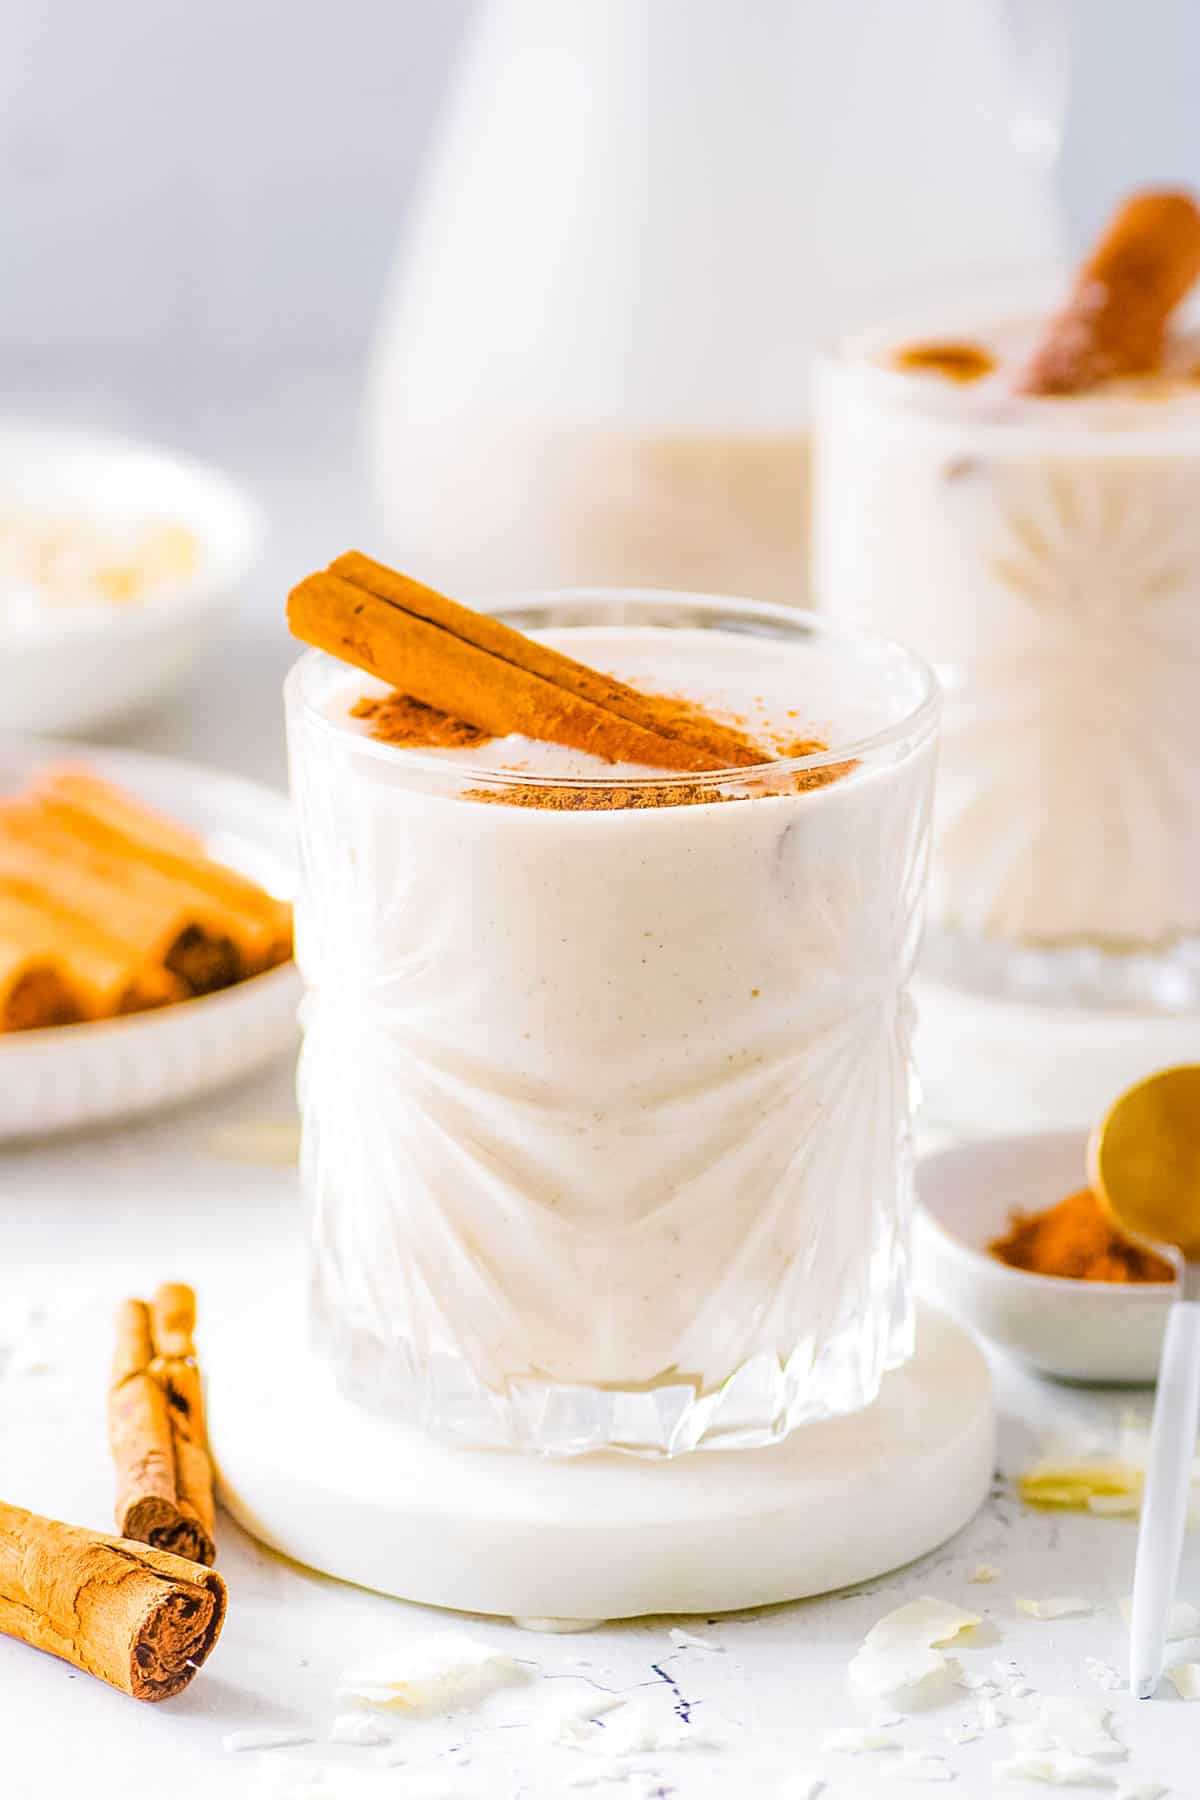 Vegan coquito served in a glass with a cinnamon stick as a garnish.